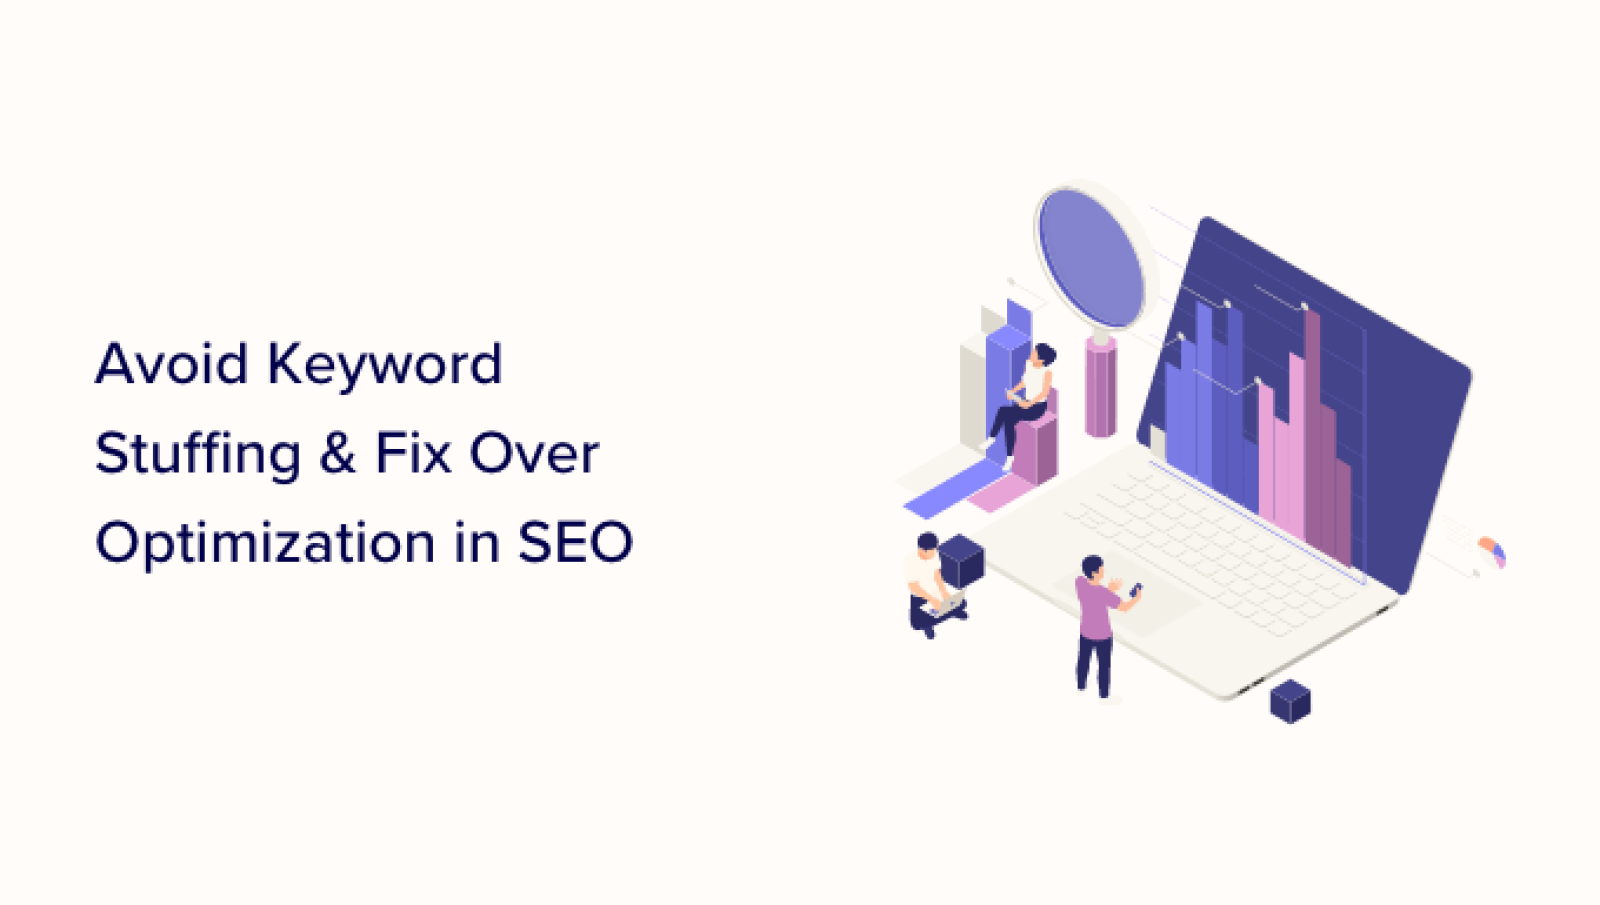 Learn how to Keep away from Key phrase Stuffing & Repair Over Optimization in search engine optimisation